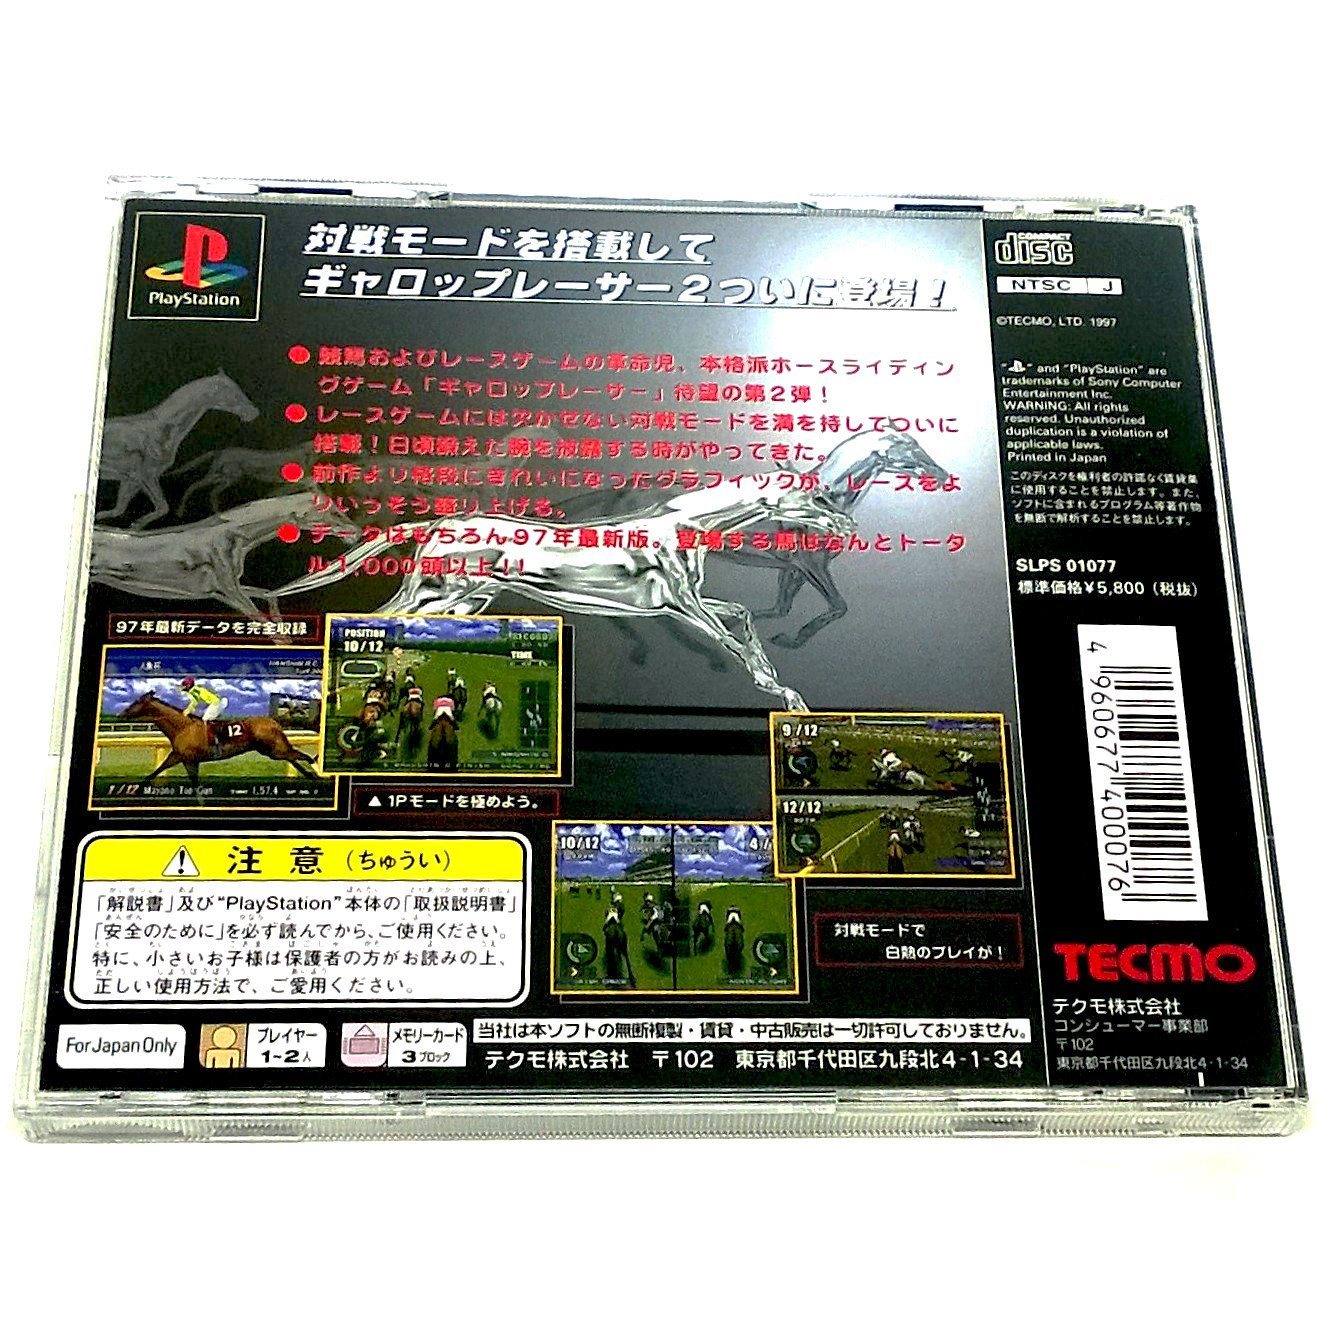 Gallop Racer 2: One and Only Road to Victory for PlayStation (Import) - Back of case